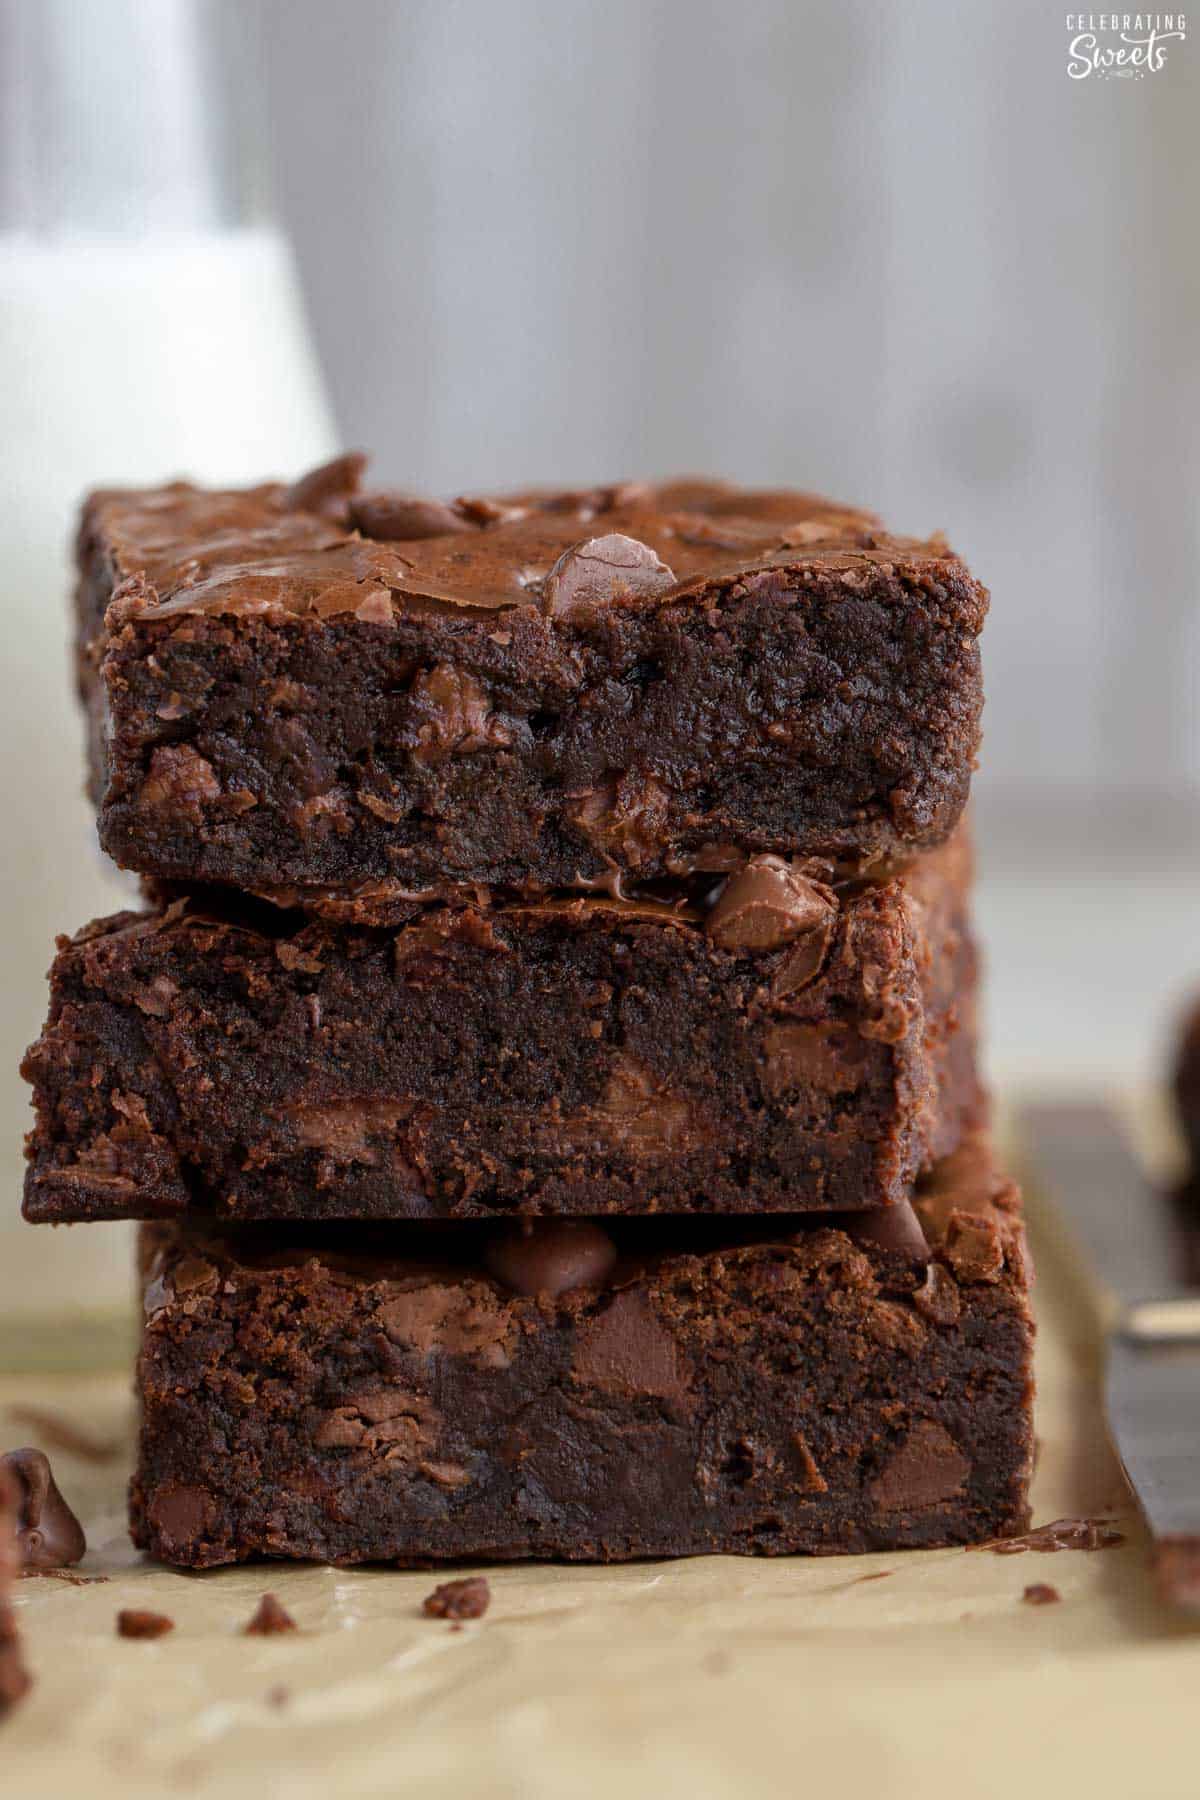 Stack of three homemade brownies on parchment paper.